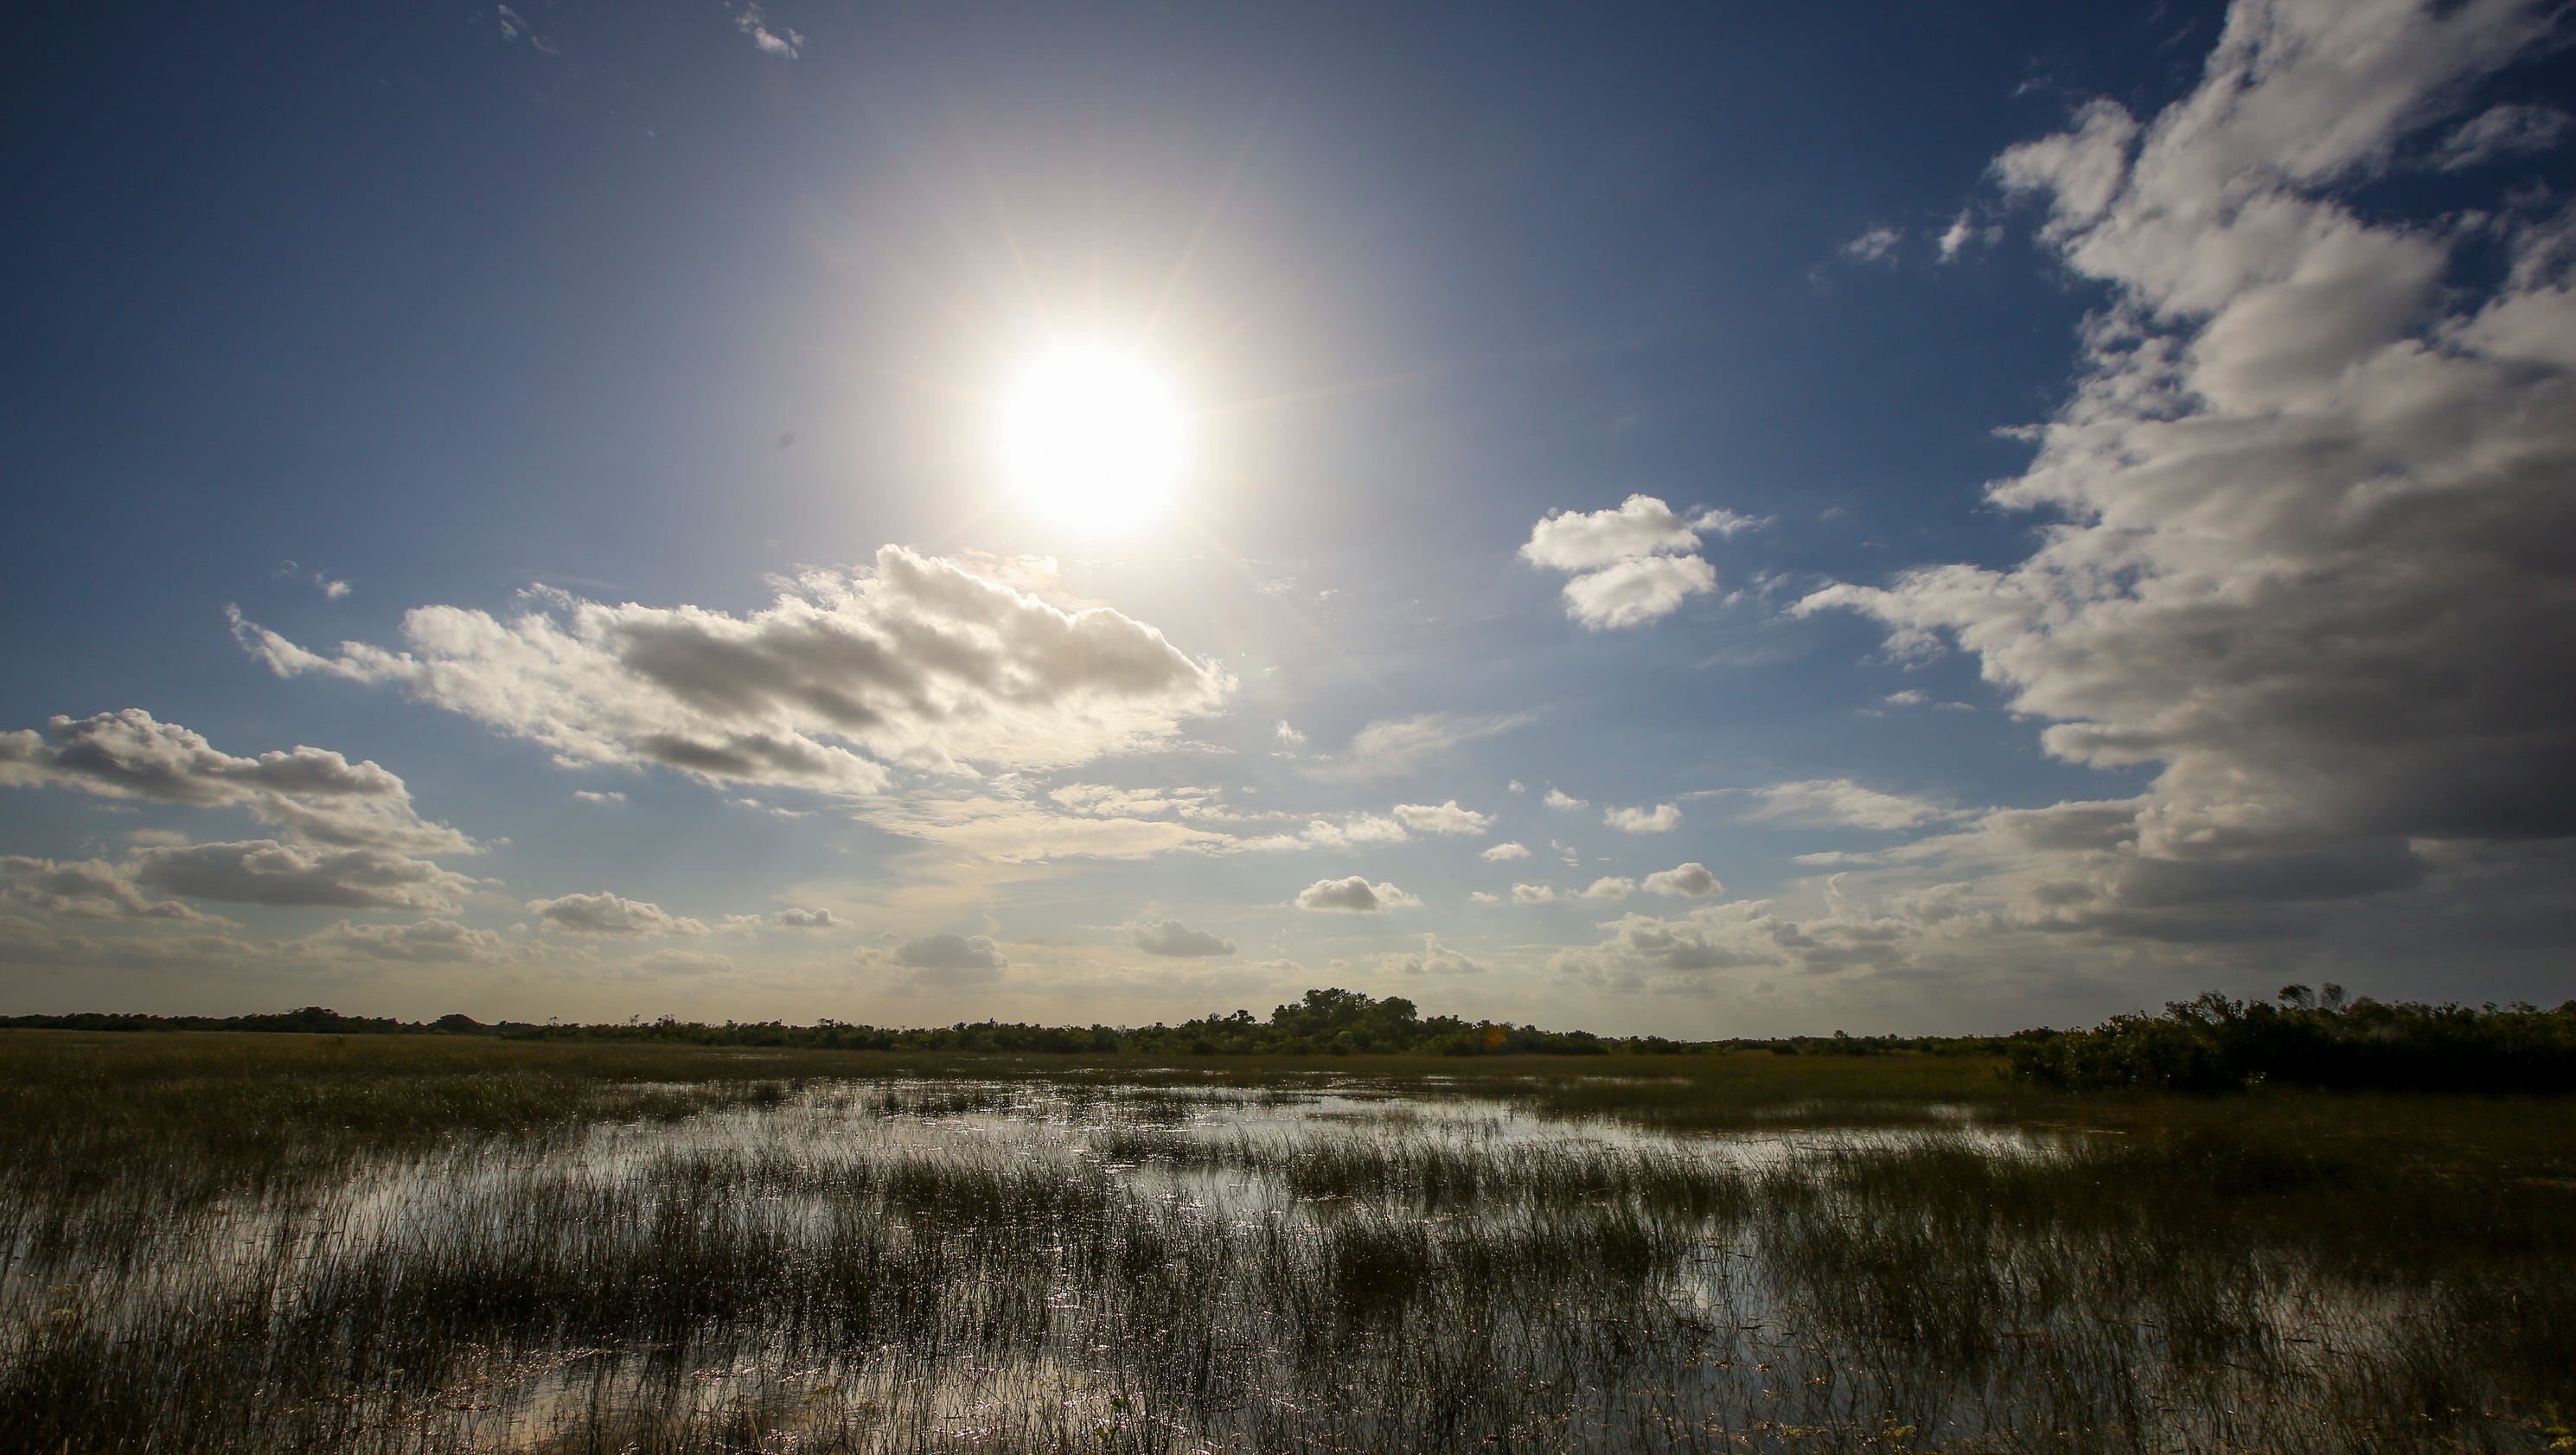 Everglades National Park whispers to visitors